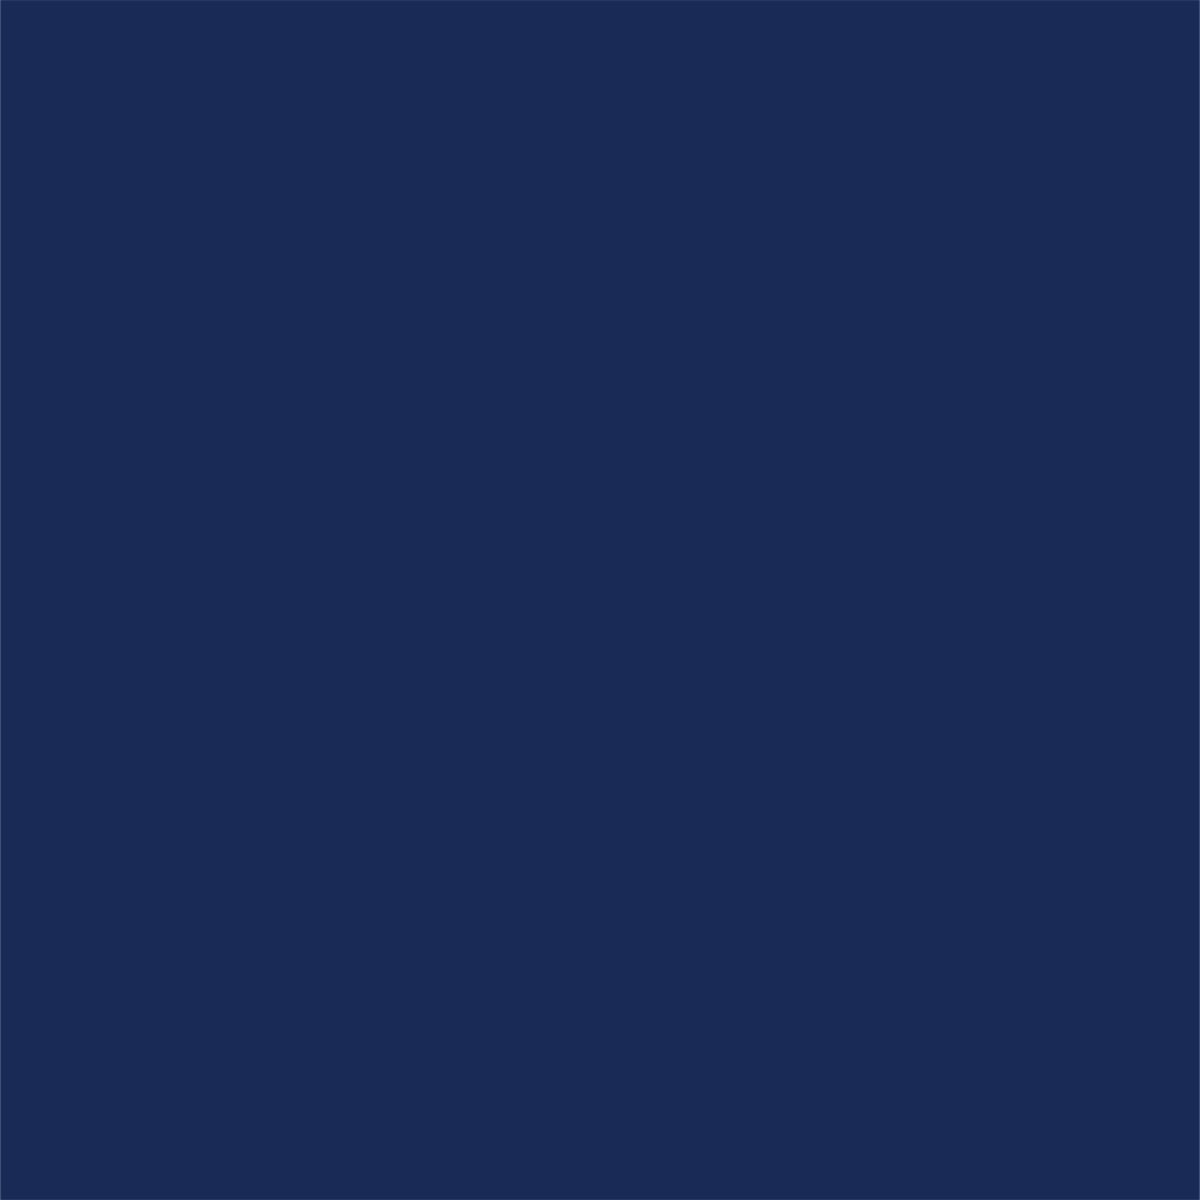 Dark Blue Fabric Photography Backdorps for Studio Solid Portrait Background